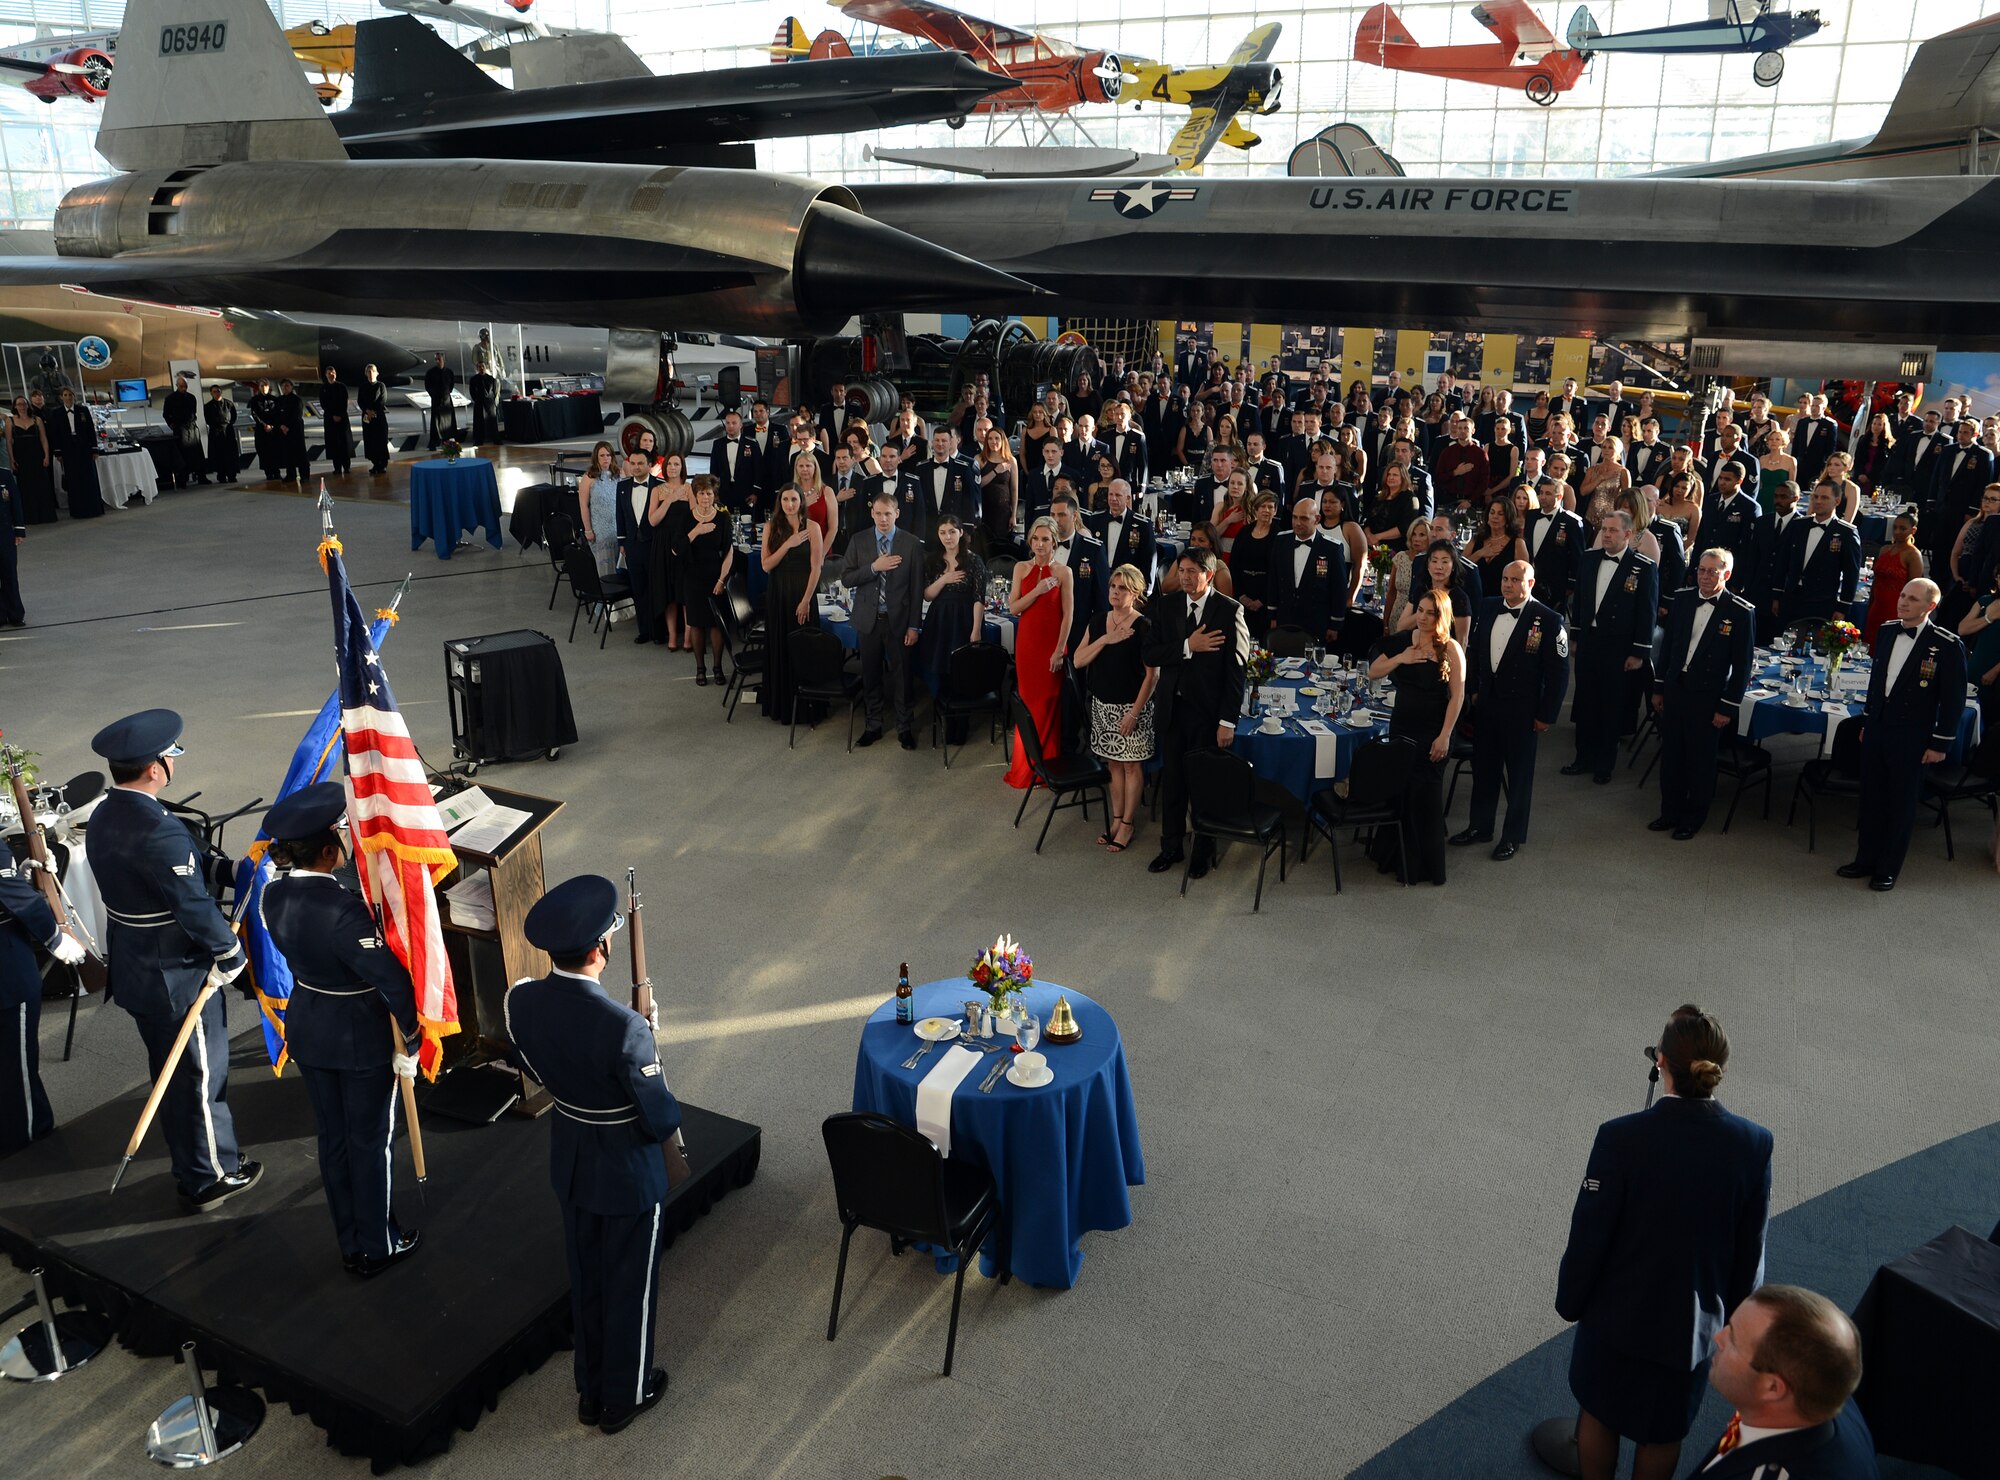 Team McChord Airmen, civic leaders and guests show their respect during the singing of the National Anthem at the 10th AS 75th Anniversary Heritage Gala May 6, 2016, at the Museum of Flight in Seattle, Wash. In its nearly 13 years based at McChord Field the 10th AS, also known as the “Pathfinders,” took part in missions all over the world. (U.S. Air Force photo/Senior Airman Jacob Jimenez)